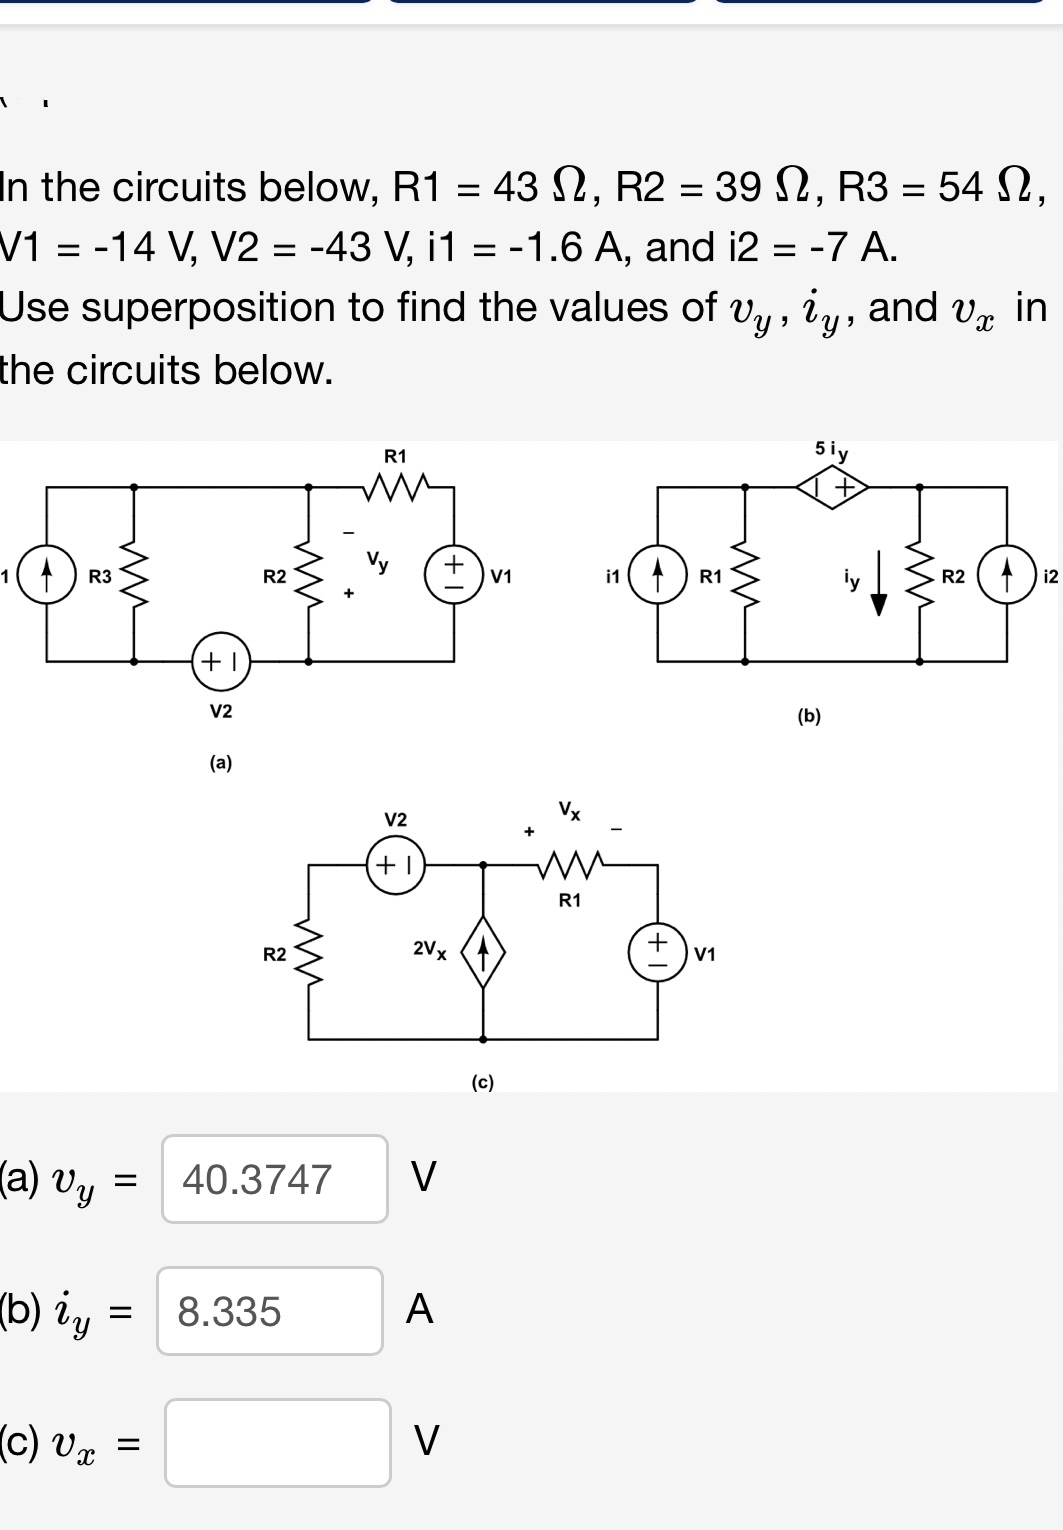 1
In the circuits below, R1 = 432, R2 = 392, R3 = 542,
V1 = -14 V, V2 = -43 V, i1 = 1.6 A, and i2 = -7 A.
-
==
Use superposition to find the values of vy, iy, and Vx in
the circuits below.
1 ) R3
(a) Uy
(b) ig
(c) Ur
=
+1
=
V2
(a)
R2
R2
= 8.335
m
+
R1
V2
+1
40.3747 V
2V x
A
+
V
V1
(c)
+
in
Vx
mi
R1
R1
व
+ vi
(b)
m
R24
i2